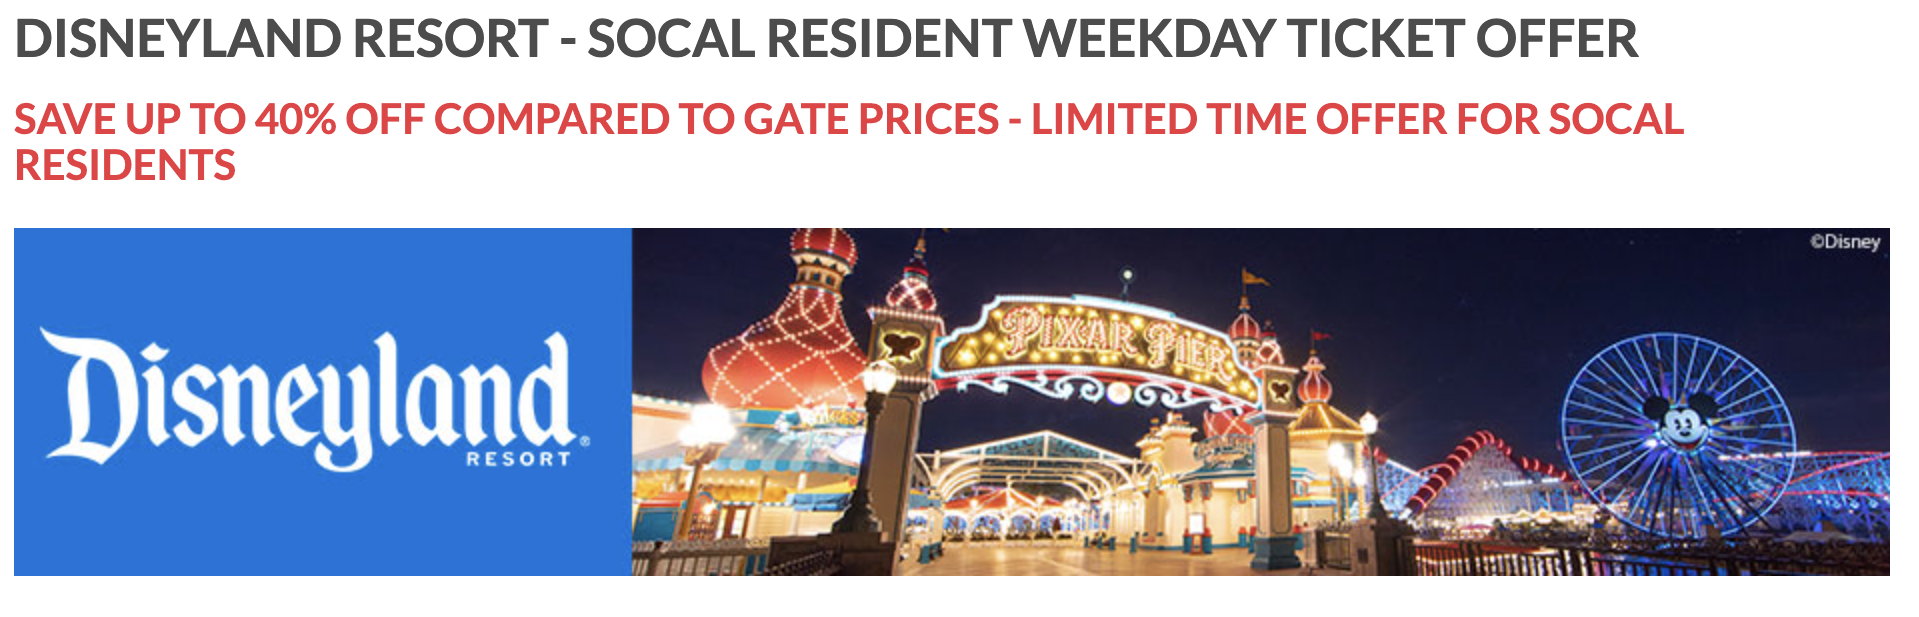 Select AAA Members Can Save BIG on Disneyland Tickets for a Limited